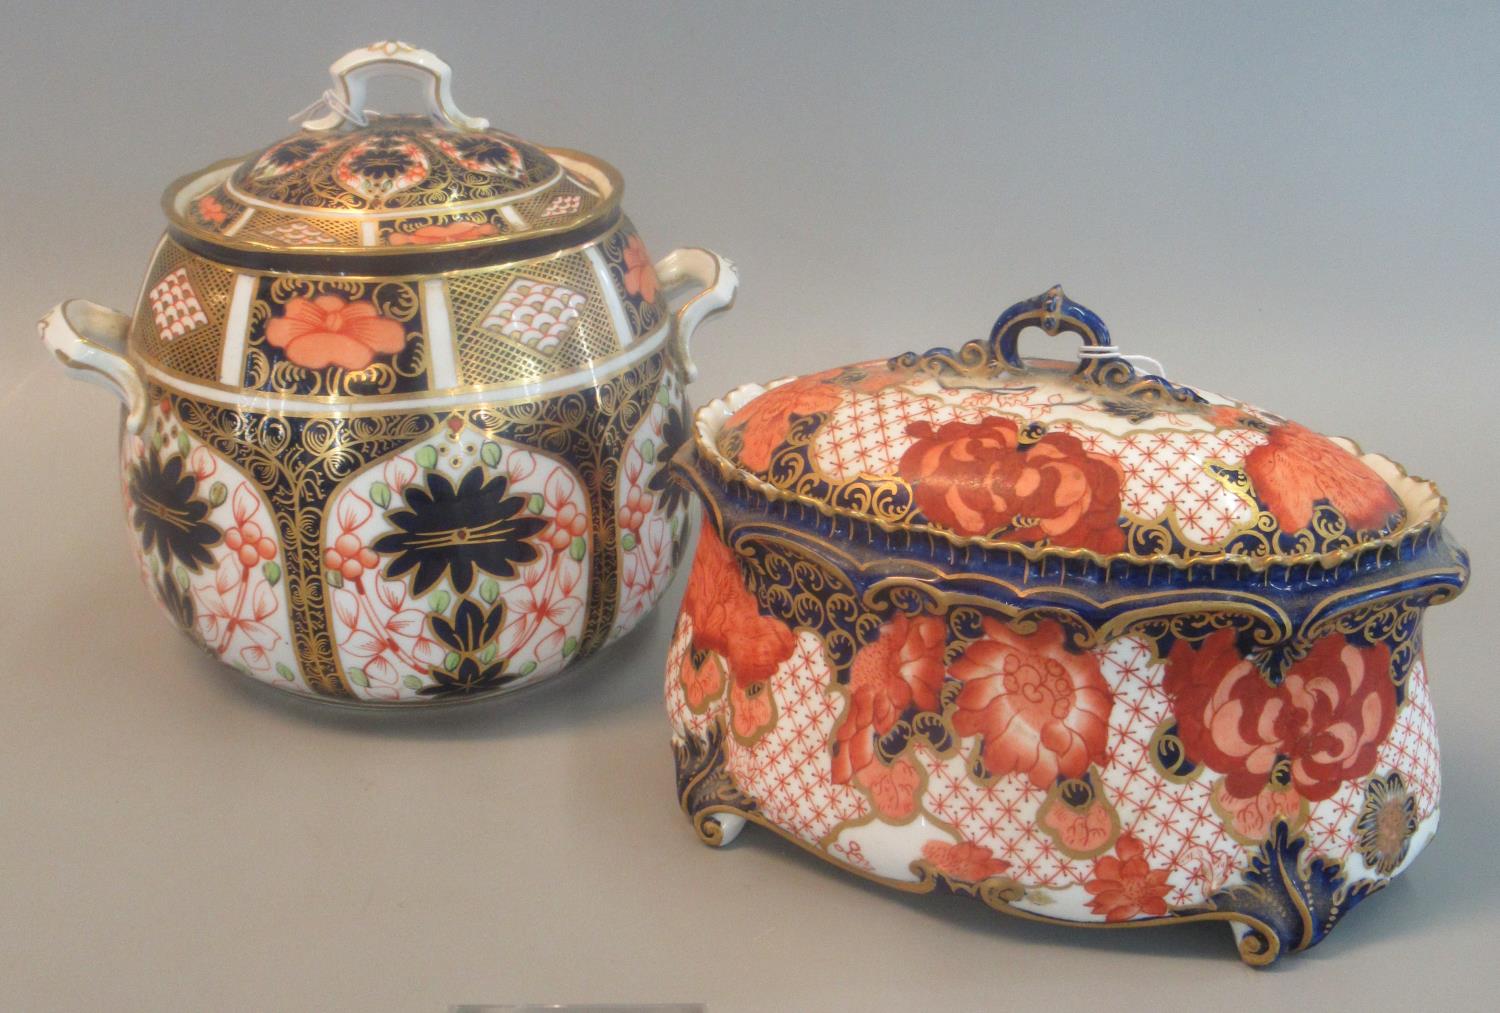 Royal Crown Derby porcelain two handled baluster shaped bowl and cover in typical Imari pattern,